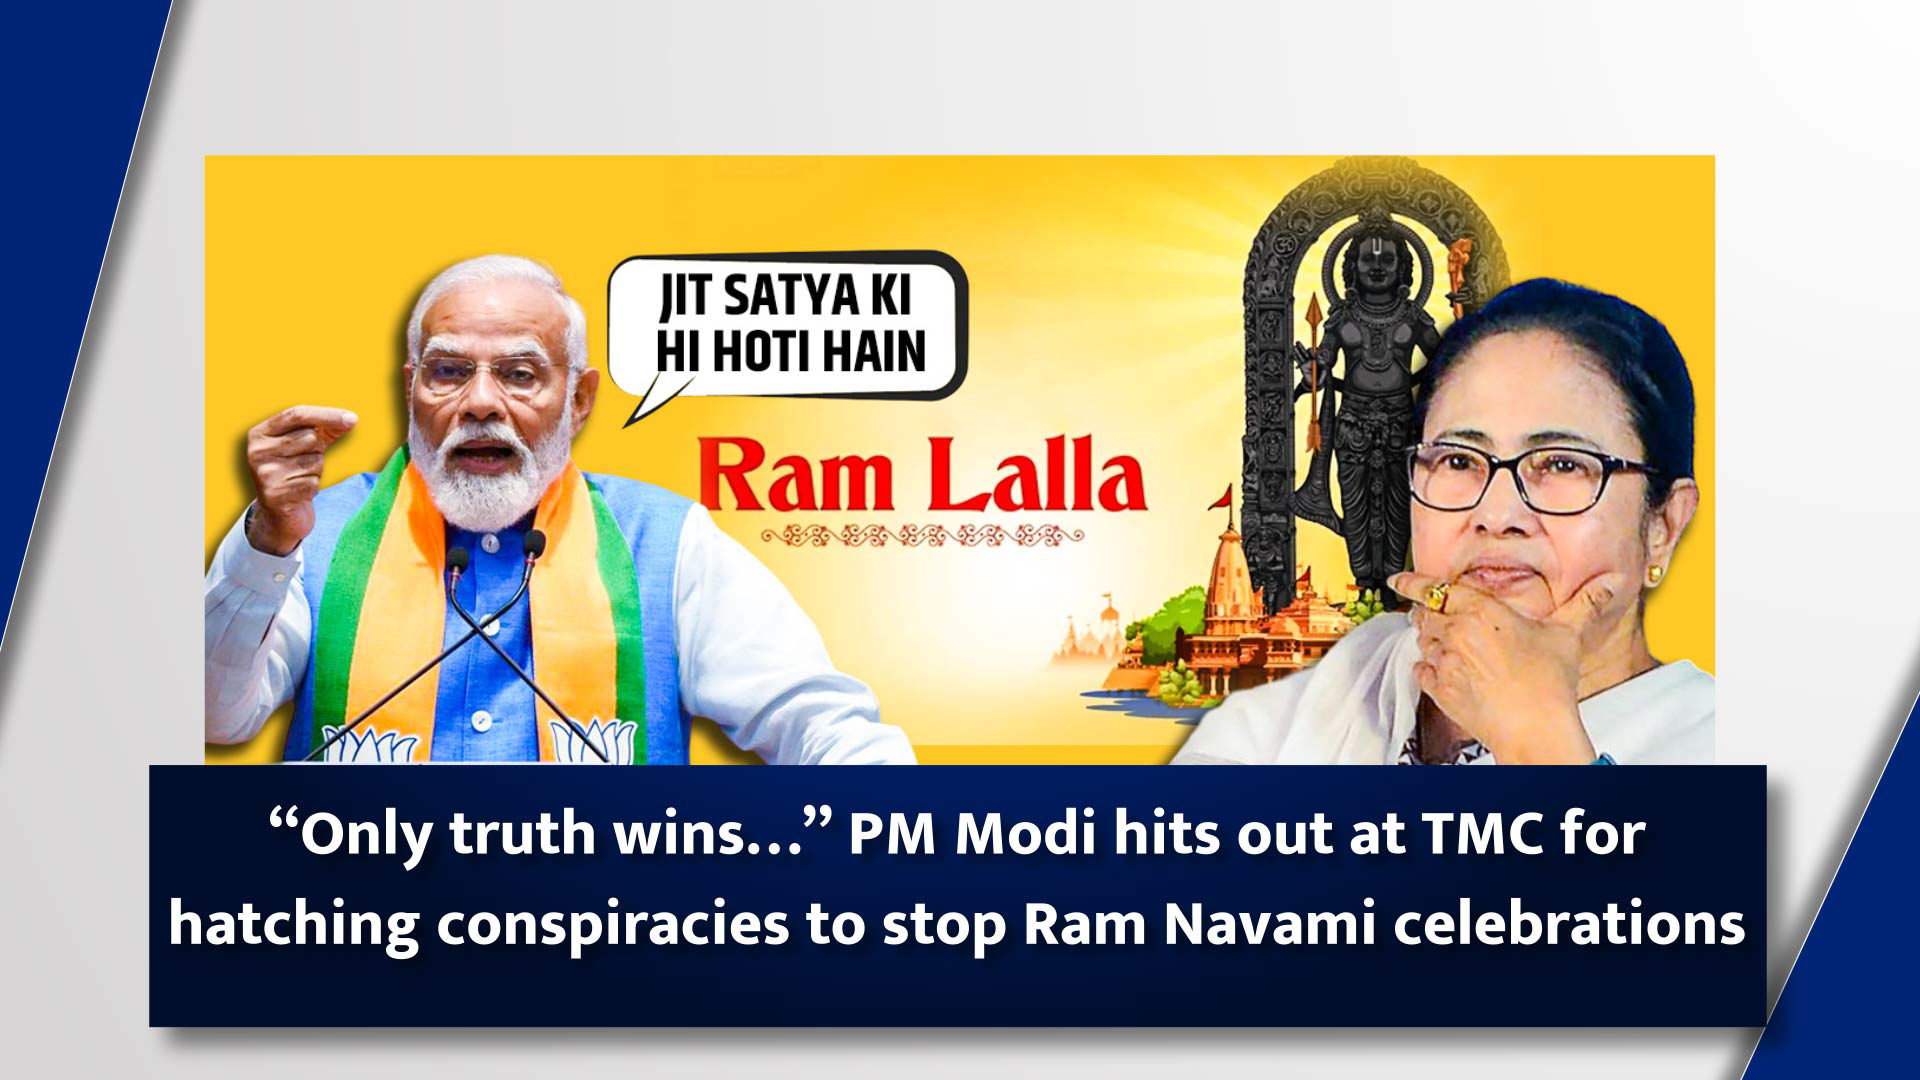 “Only truth wins…” PM Modi hits out at TMC for hatching conspiracies to